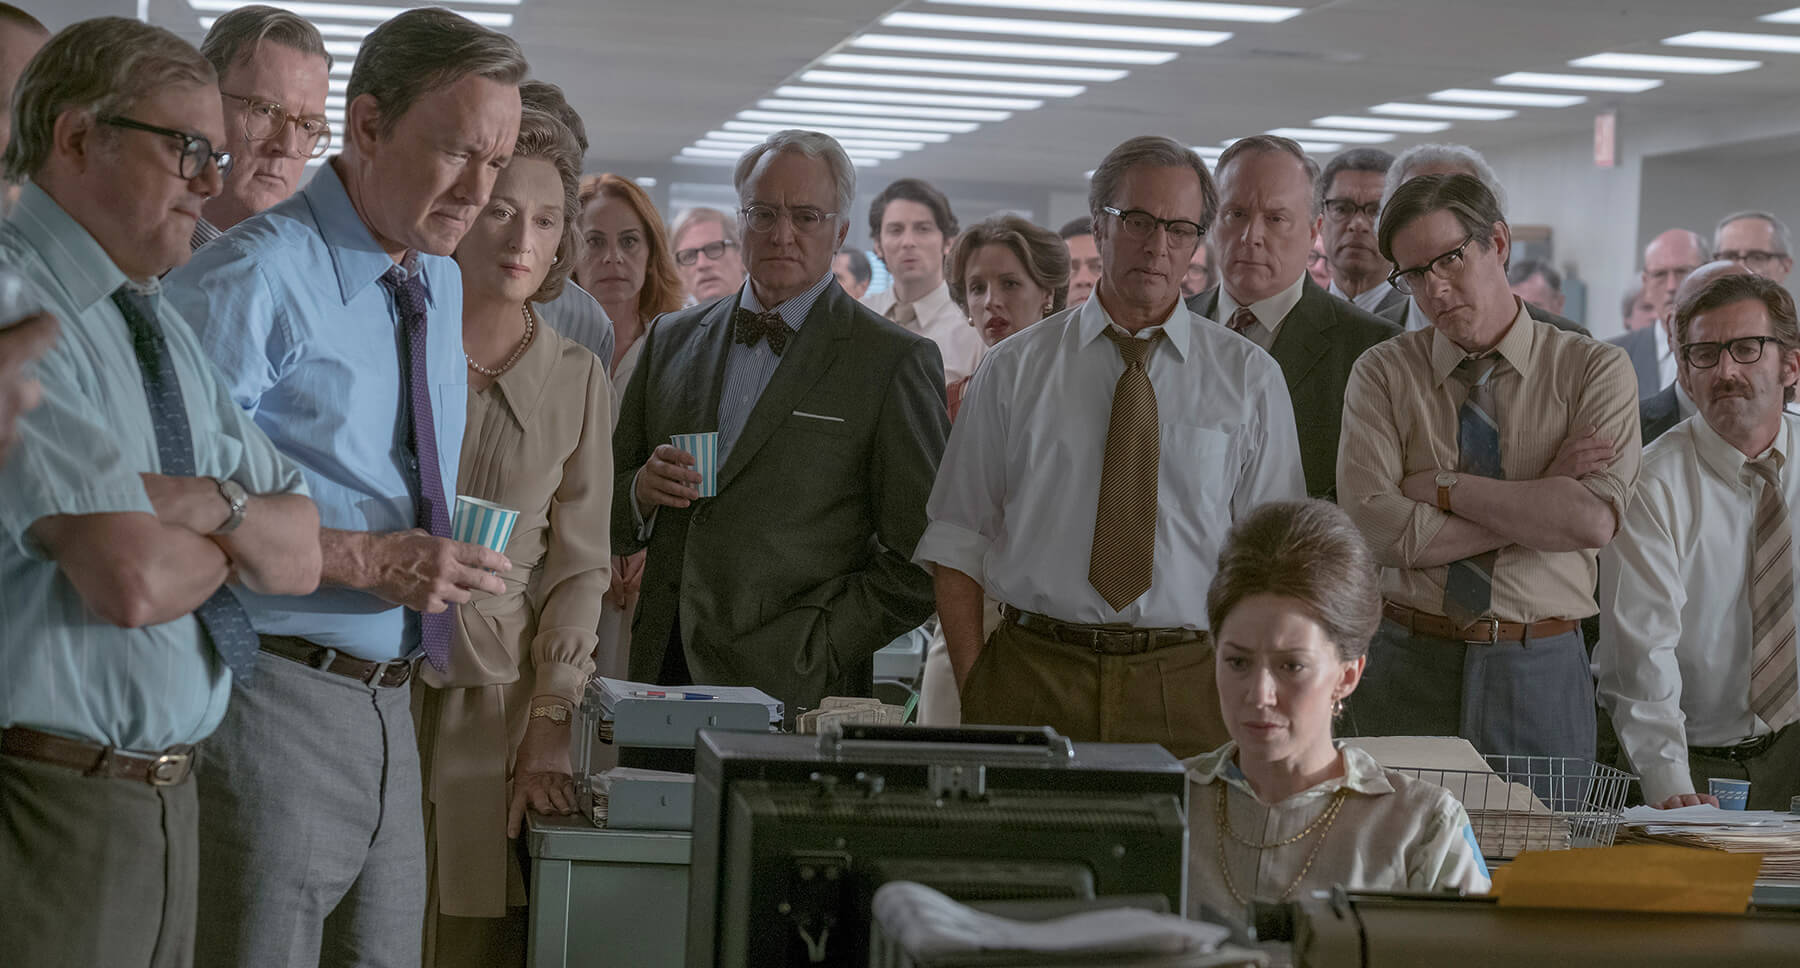 Cast of the movie "The Post"